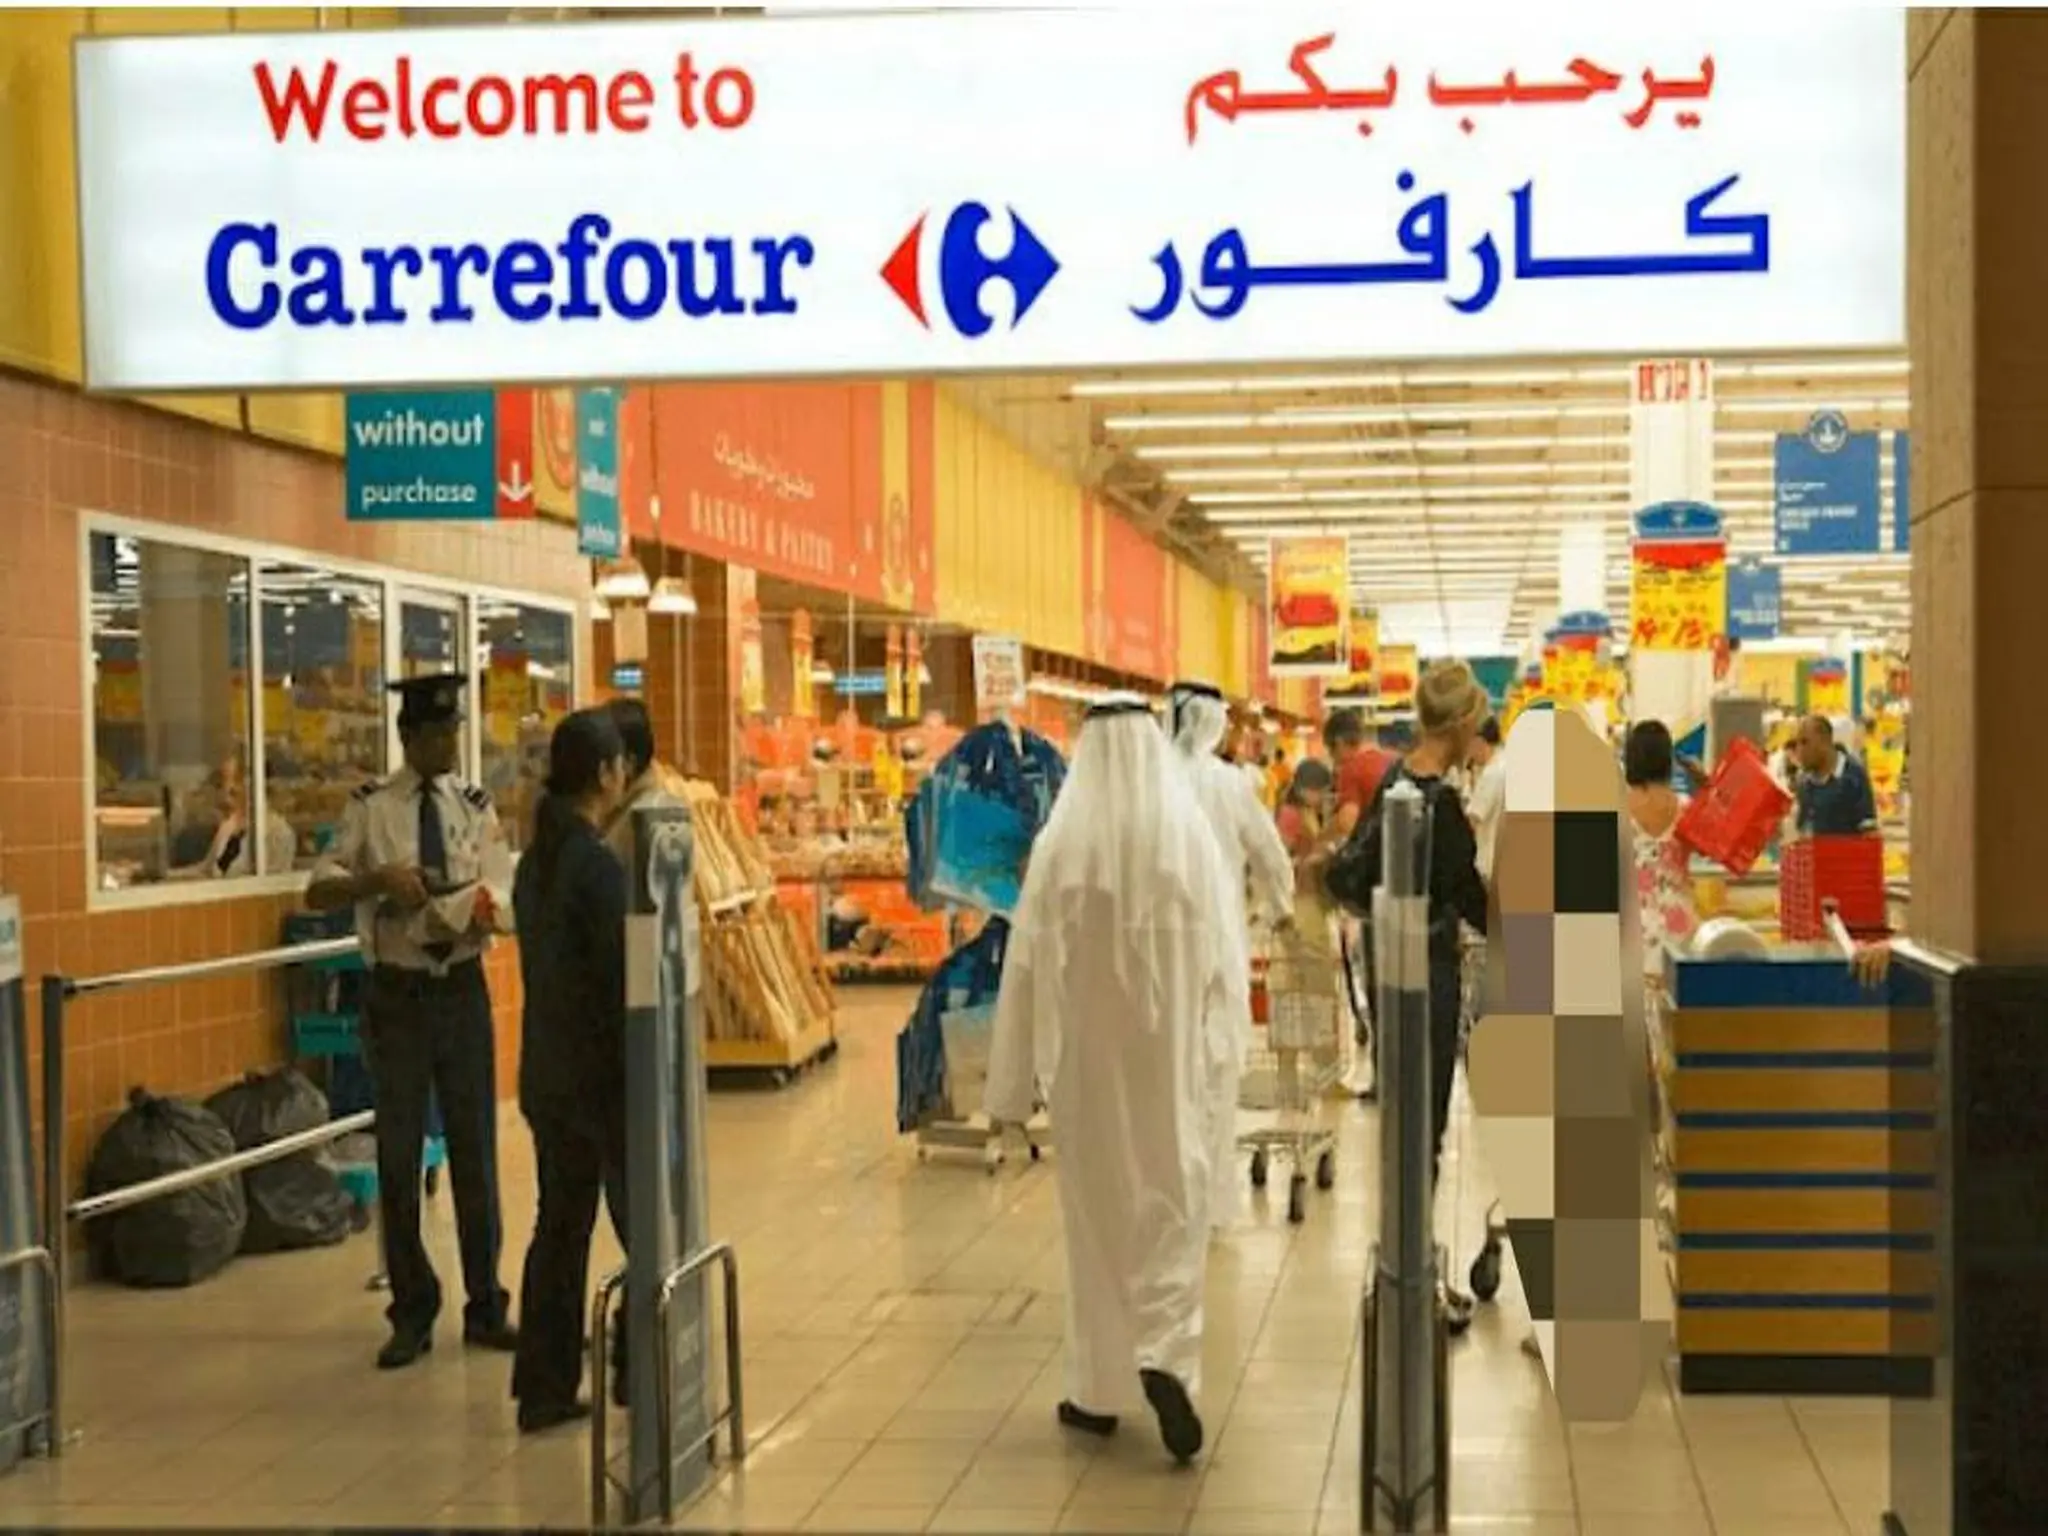 The termination date of Carrefour UAE product discounts 